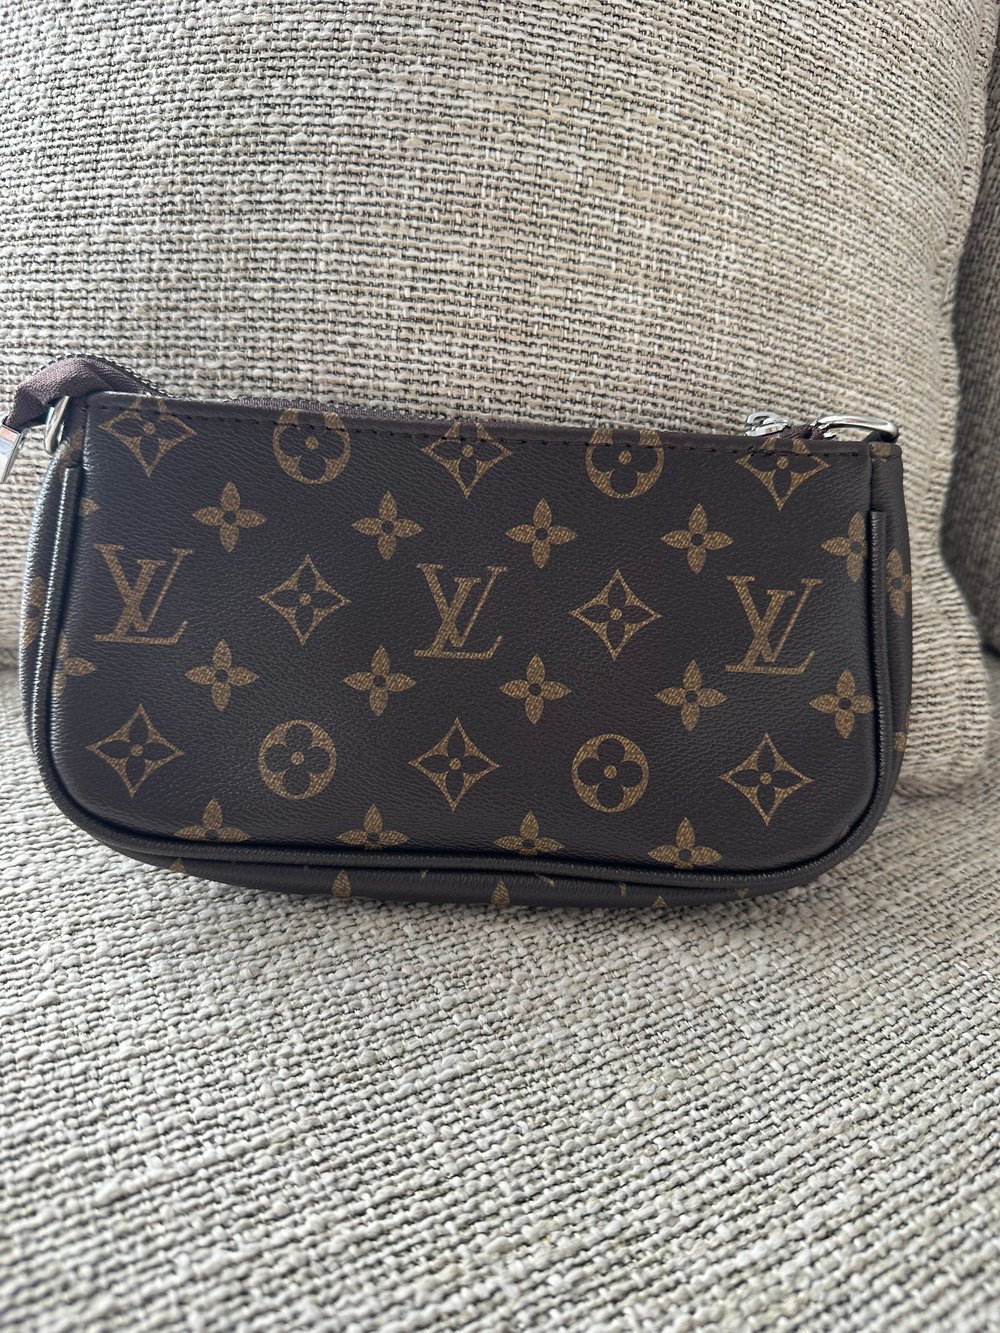 Image of Lv pouch 